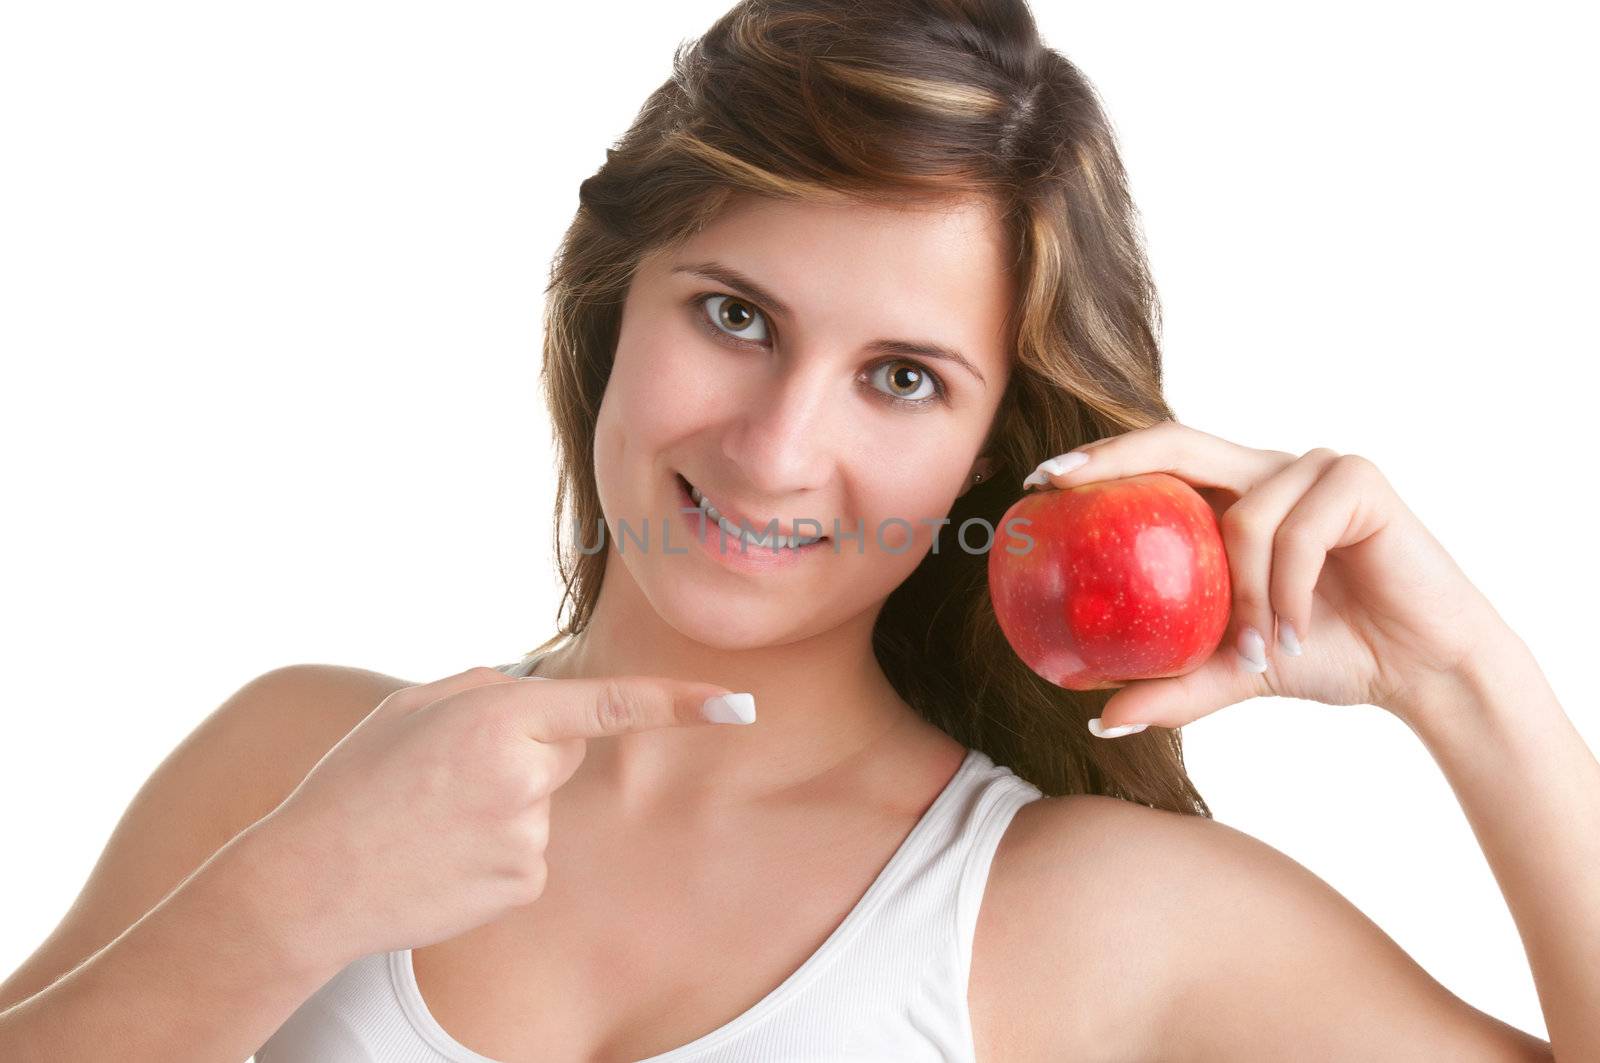 Woman smiling and pointing at a red apple she holds on her hand